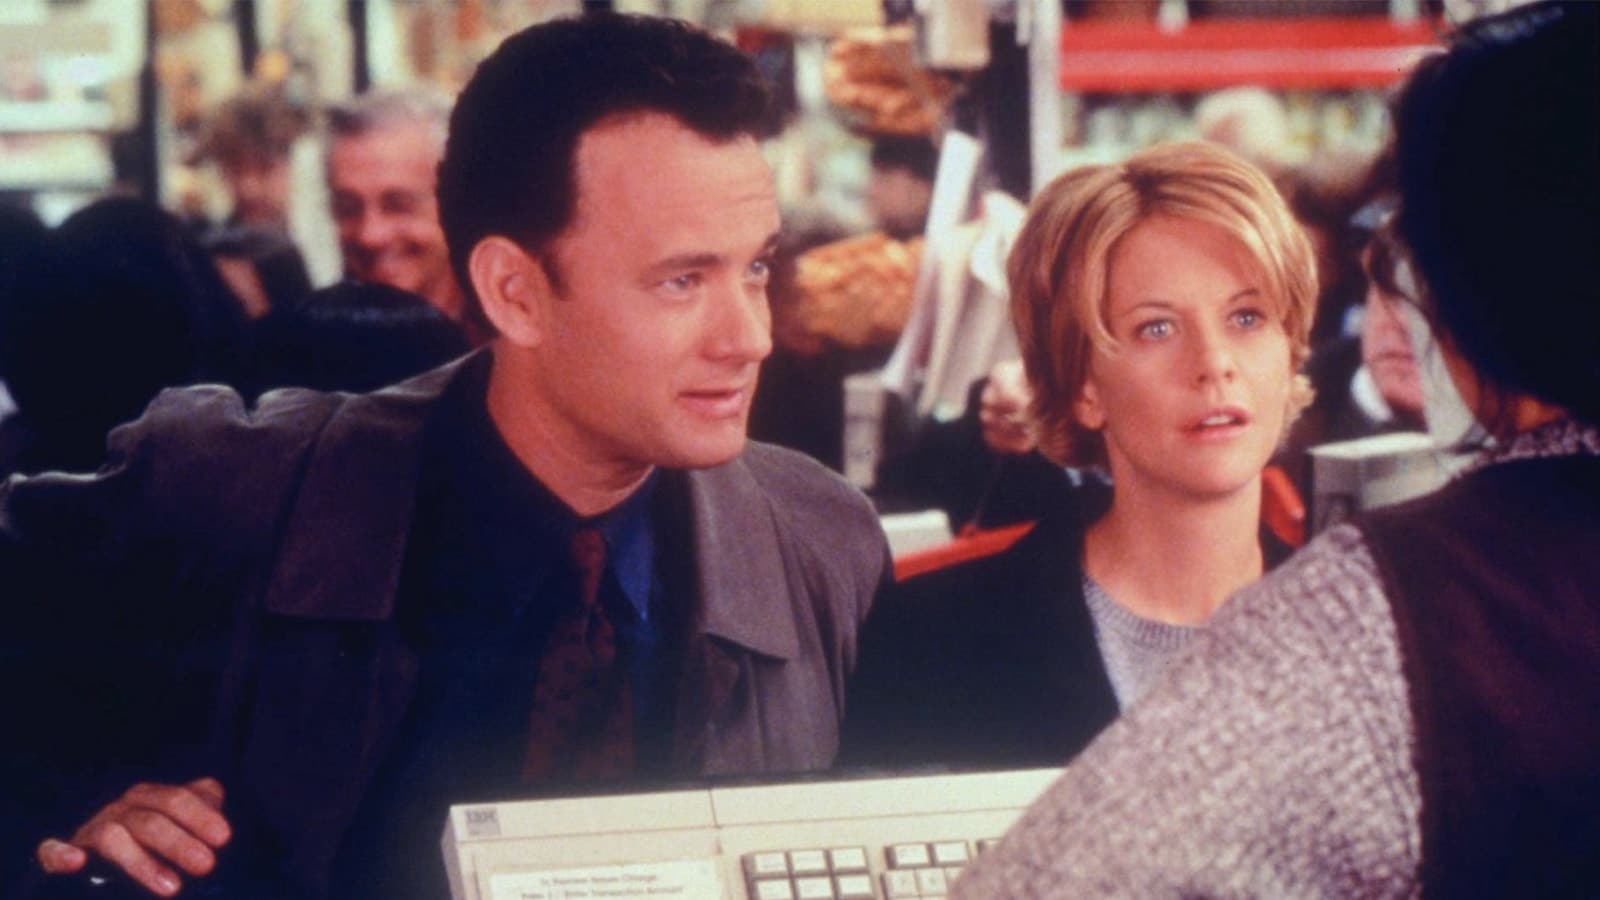 <p>Nora Ephron directs Tom Hanks and Meg Ryan in this remake of <em>The Shop Around the Corner</em>. Hanks is Joe Fox of the chain store Fox Books, and Meg Ryan is Kathleen Kelly, from the small children’s bookstore, The Shop Around the Corner. They are rivals in business but unknowingly are email pen pals who are developing real feelings for each other. This love story definitely is not love at first sight. In fact, the film takes place over many, many months and is a true delight.</p>